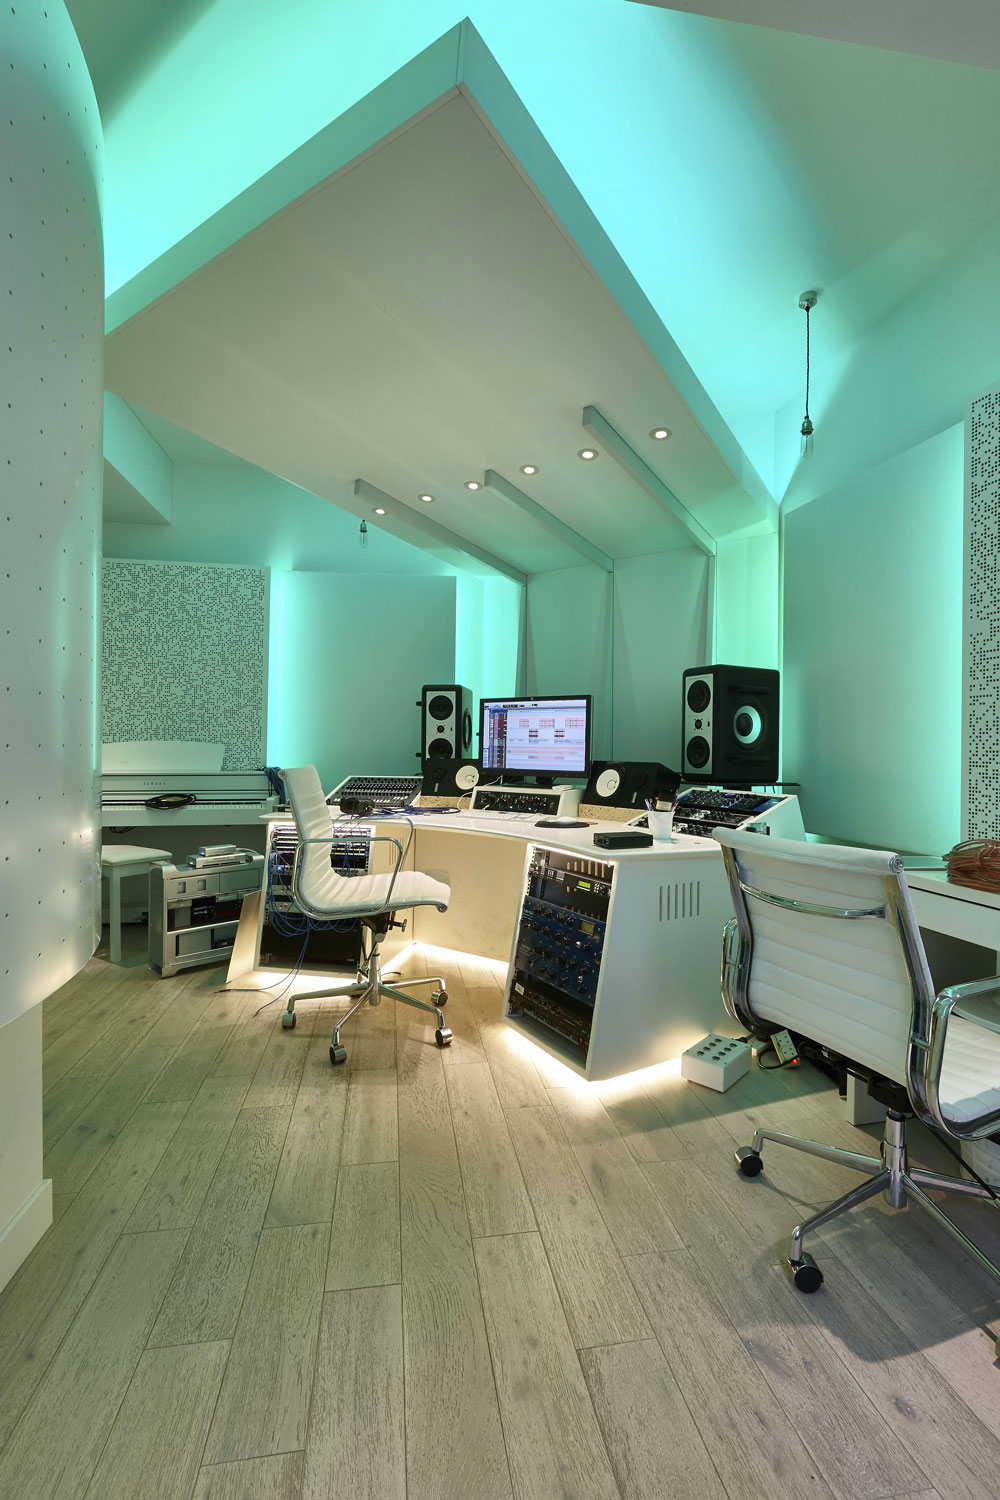 Studio 3, The Church Recording Studio, formerly owned by Dave Stewart of the Eurythmics | Interiors Photography